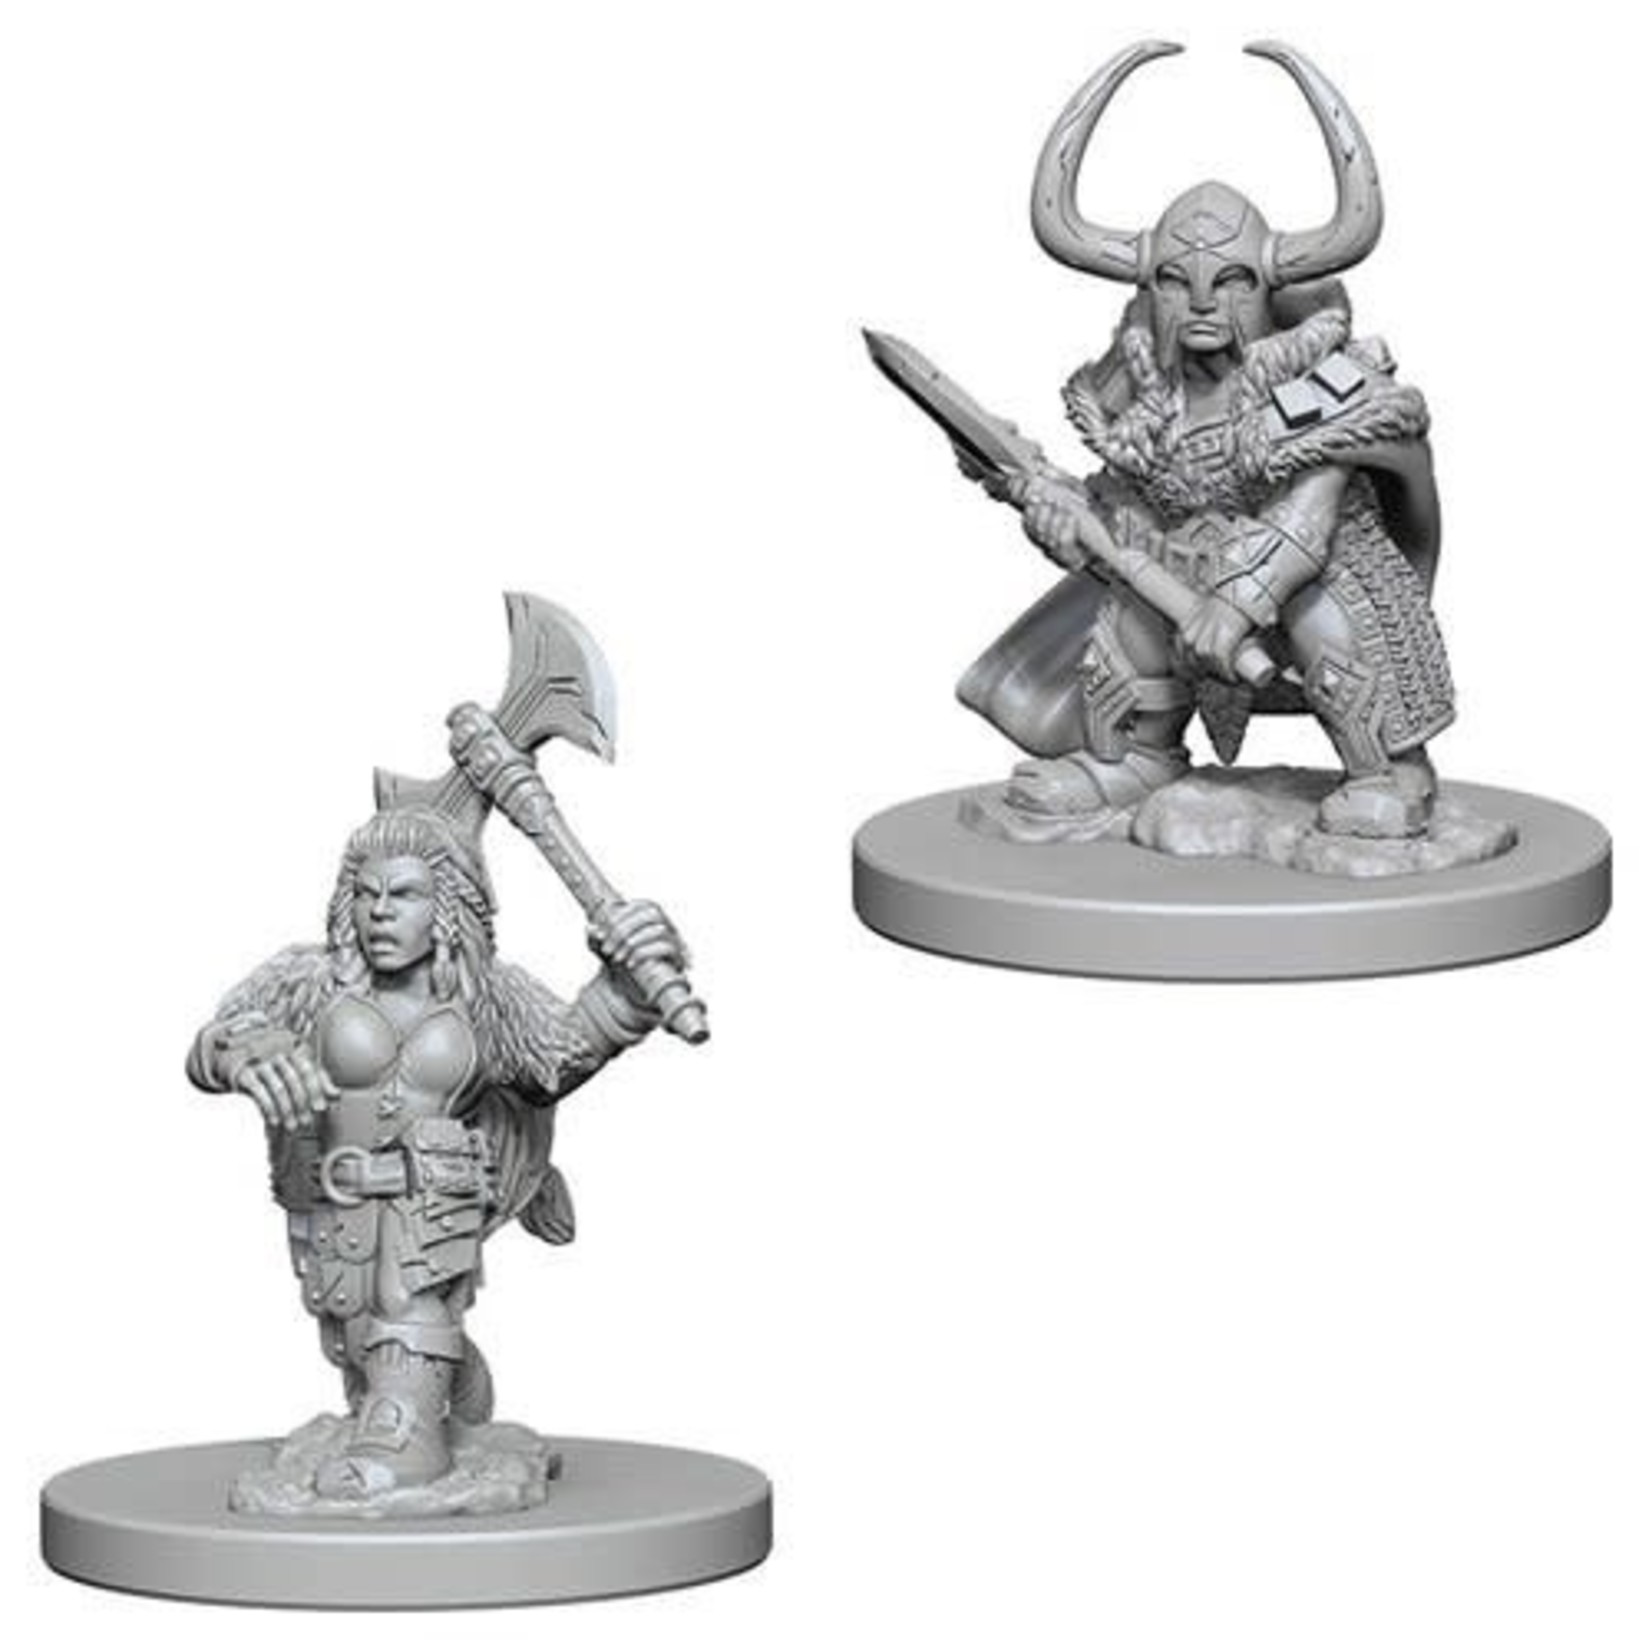 WizKids Dungeons and Dragons Nolzur's Marvelous Minis Dwarf Female Barbarian